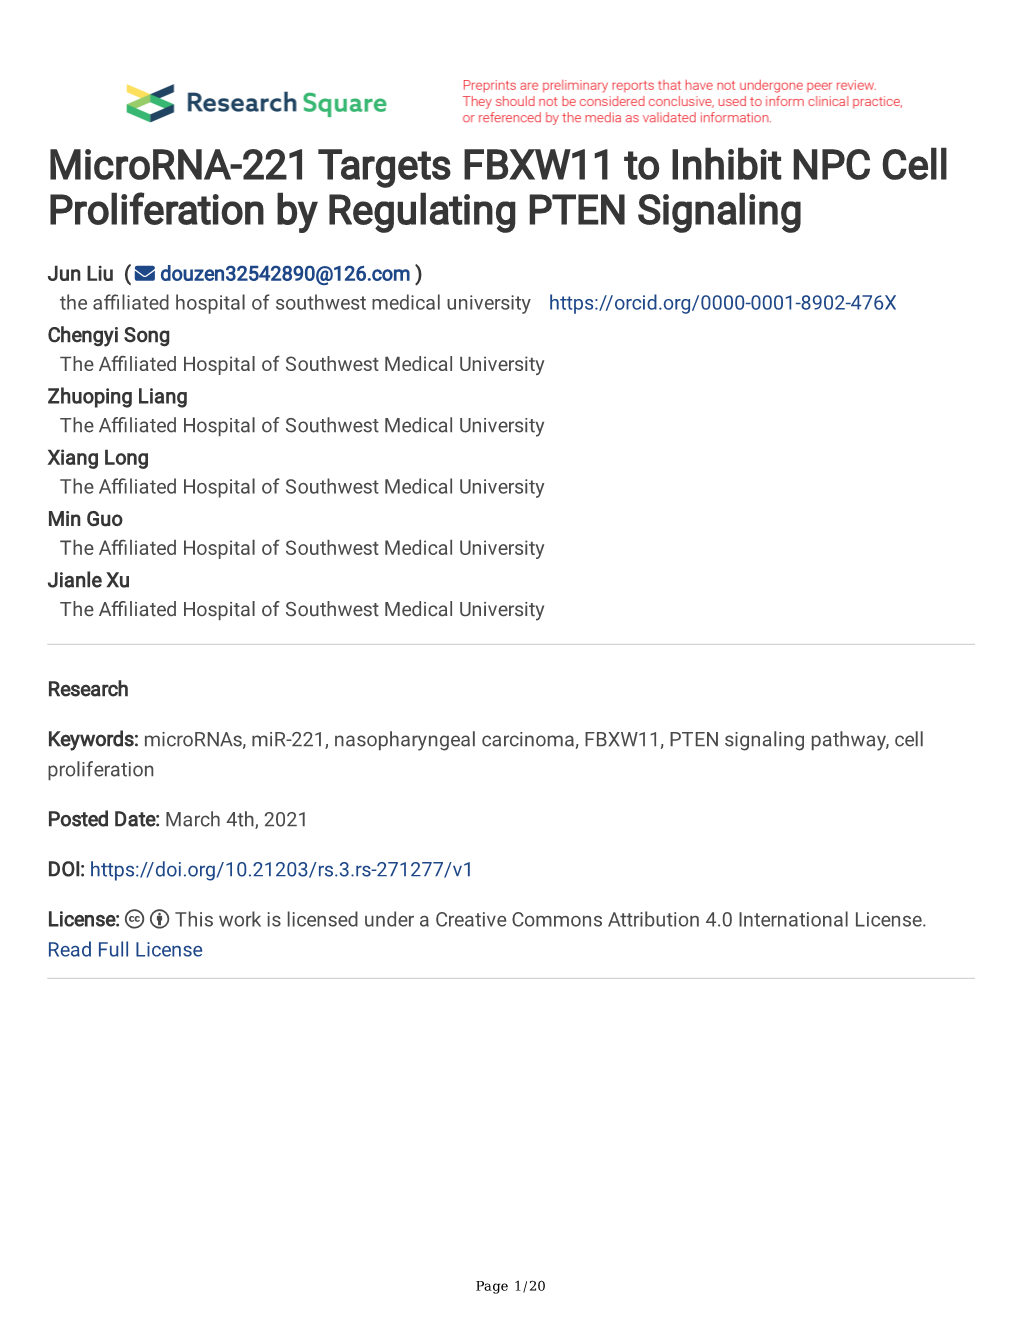 Microrna-221 Targets FBXW11 to Inhibit NPC Cell Proliferation by Regulating PTEN Signaling